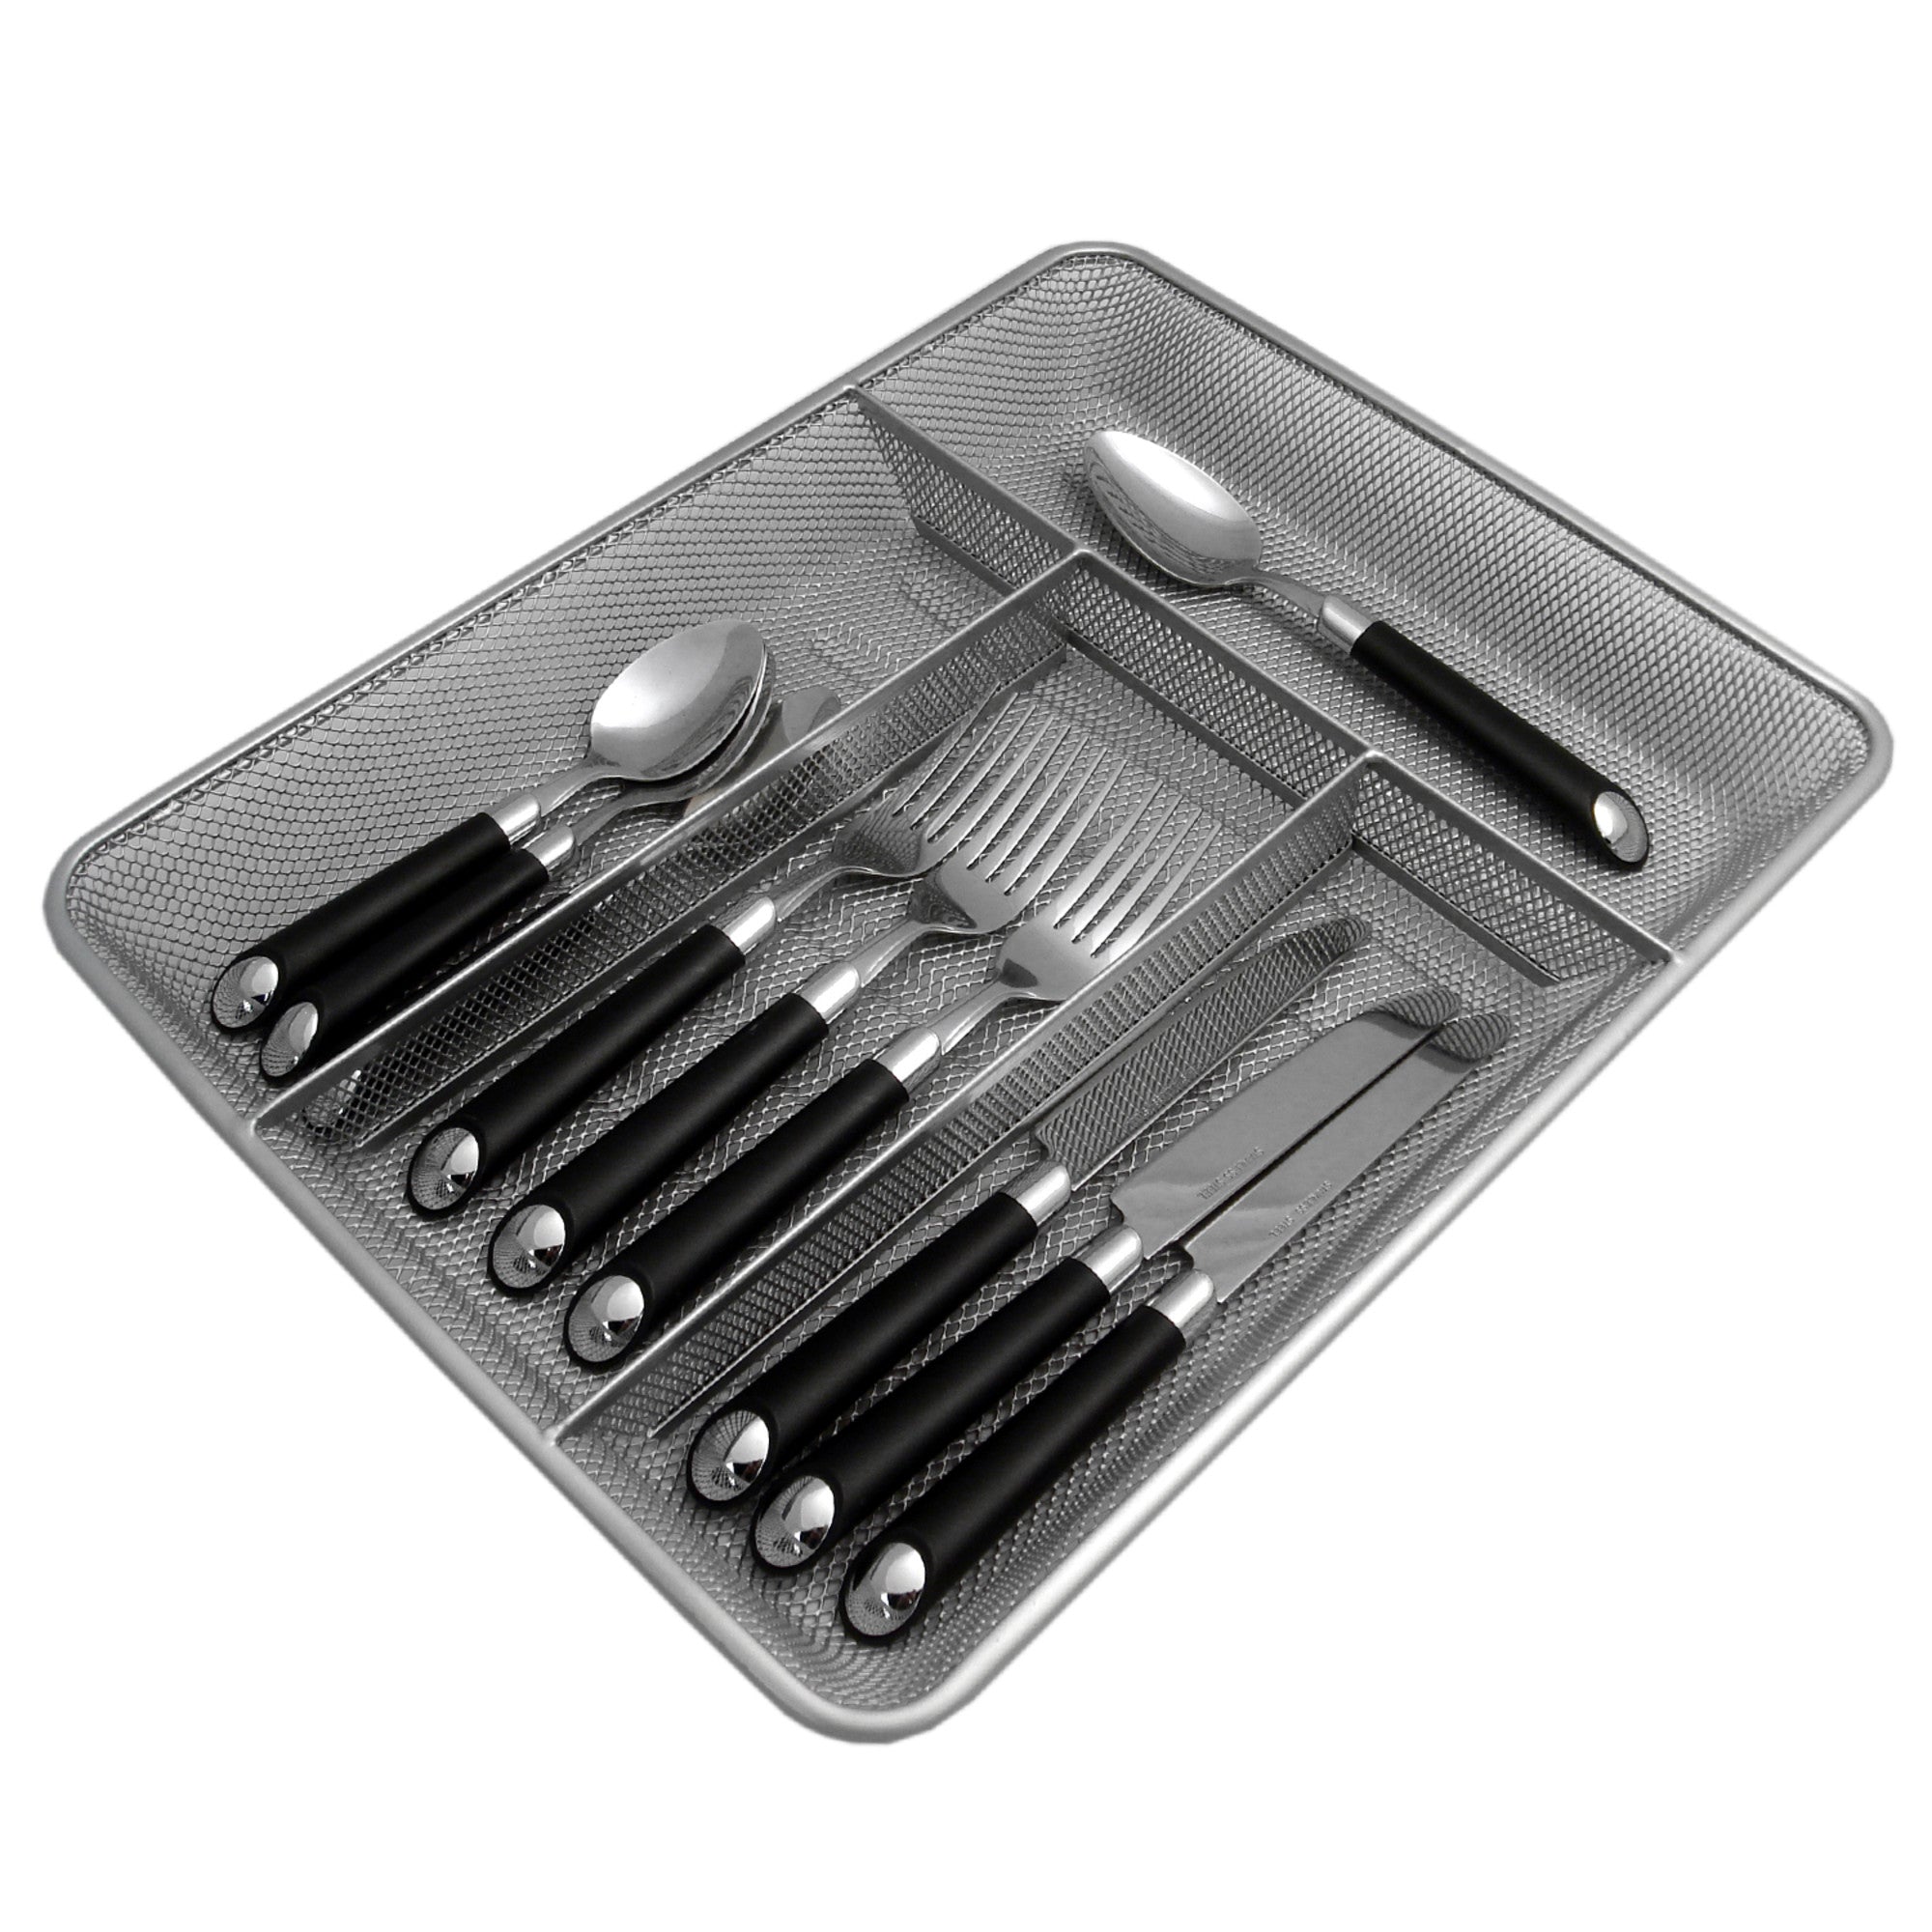 Home Basics Modern Mesh Steel Cutlery Tray with 4 Sections of Storage Space - Assorted Colors